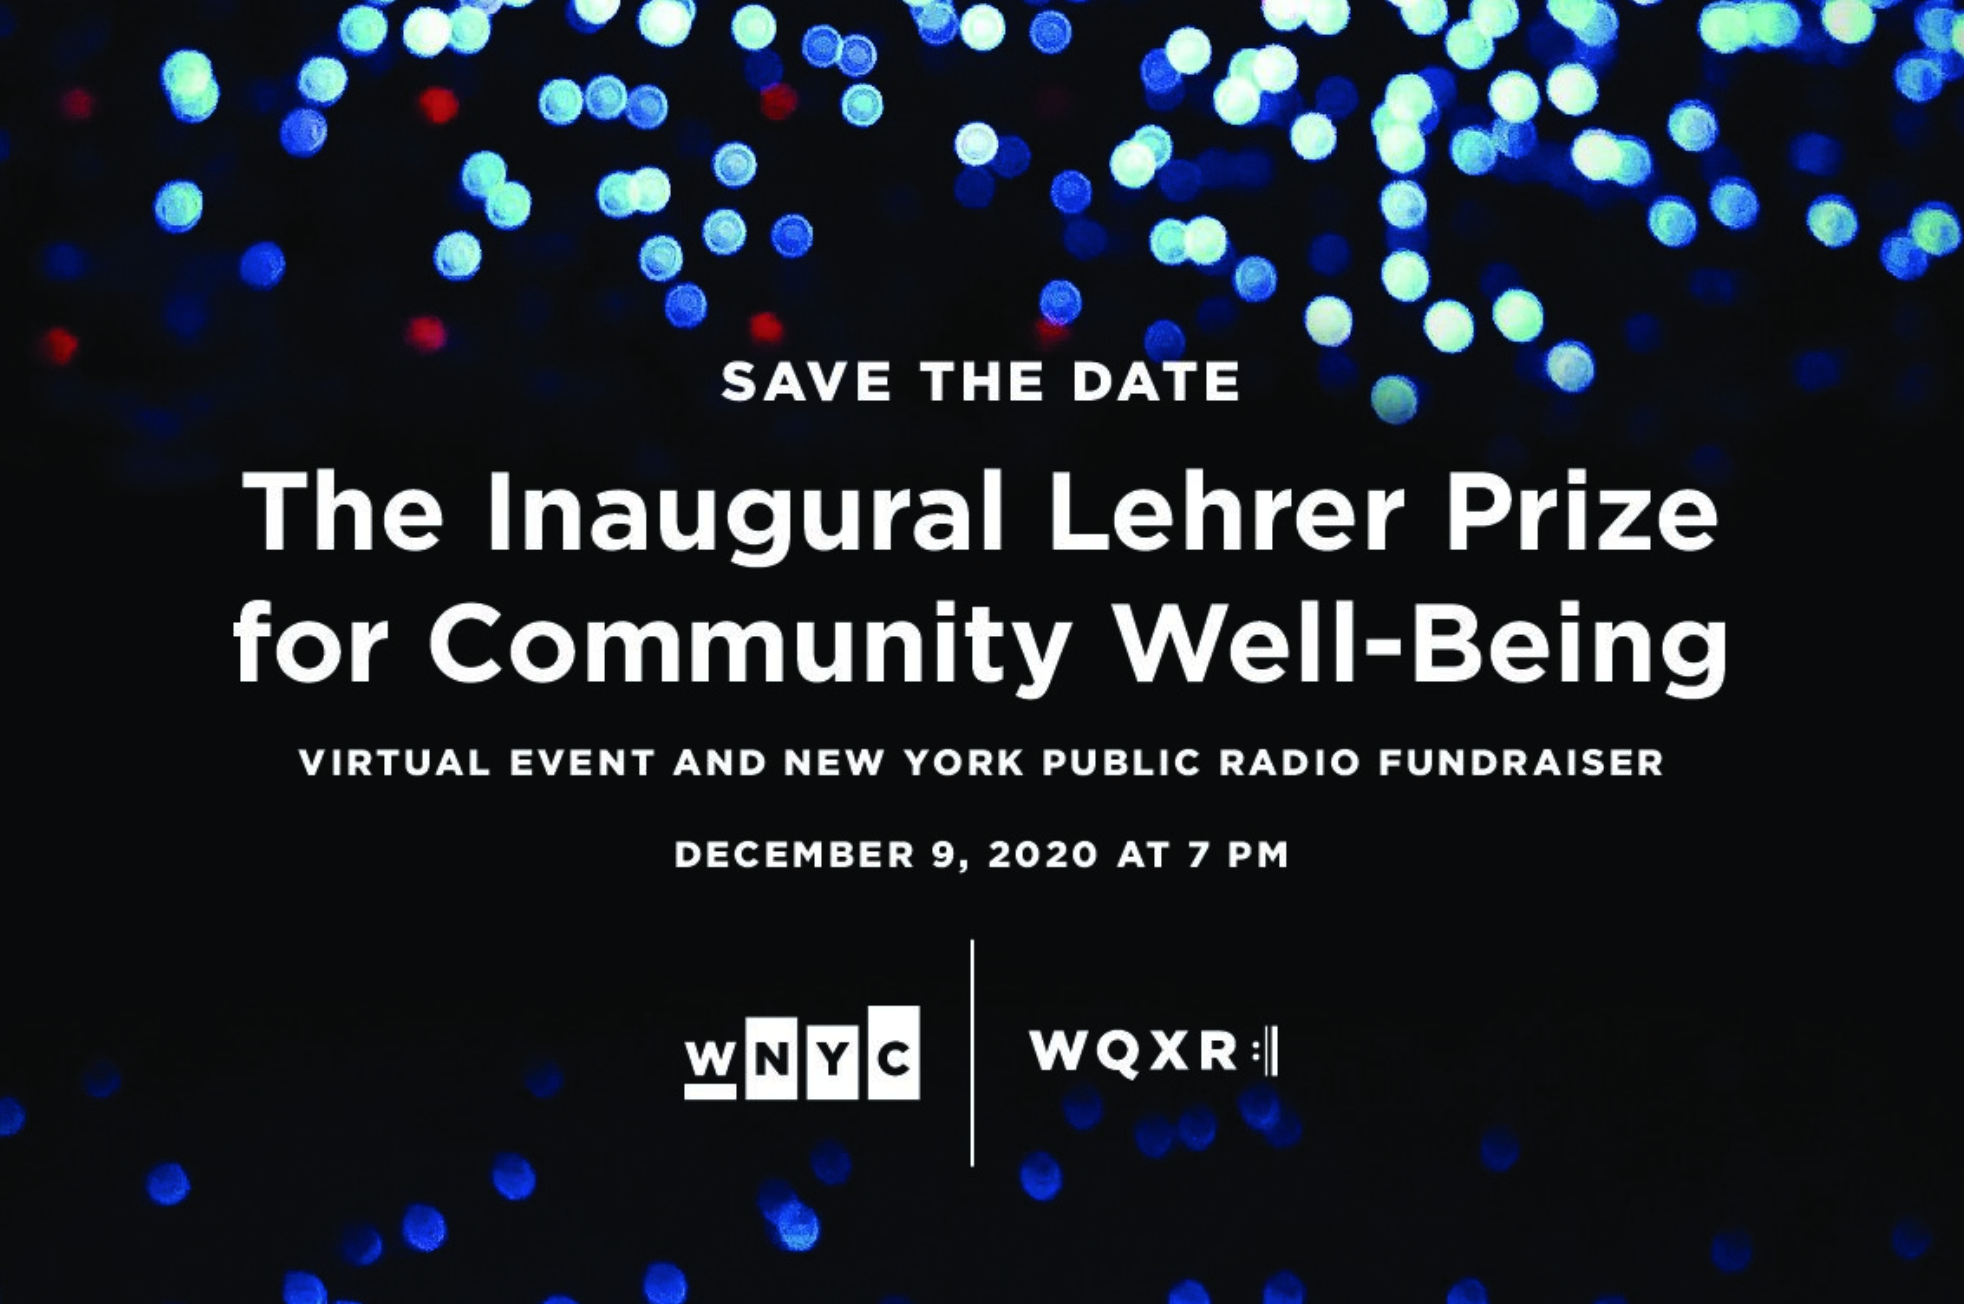 The Inaugural Lehrer Prize for Community Well-Being